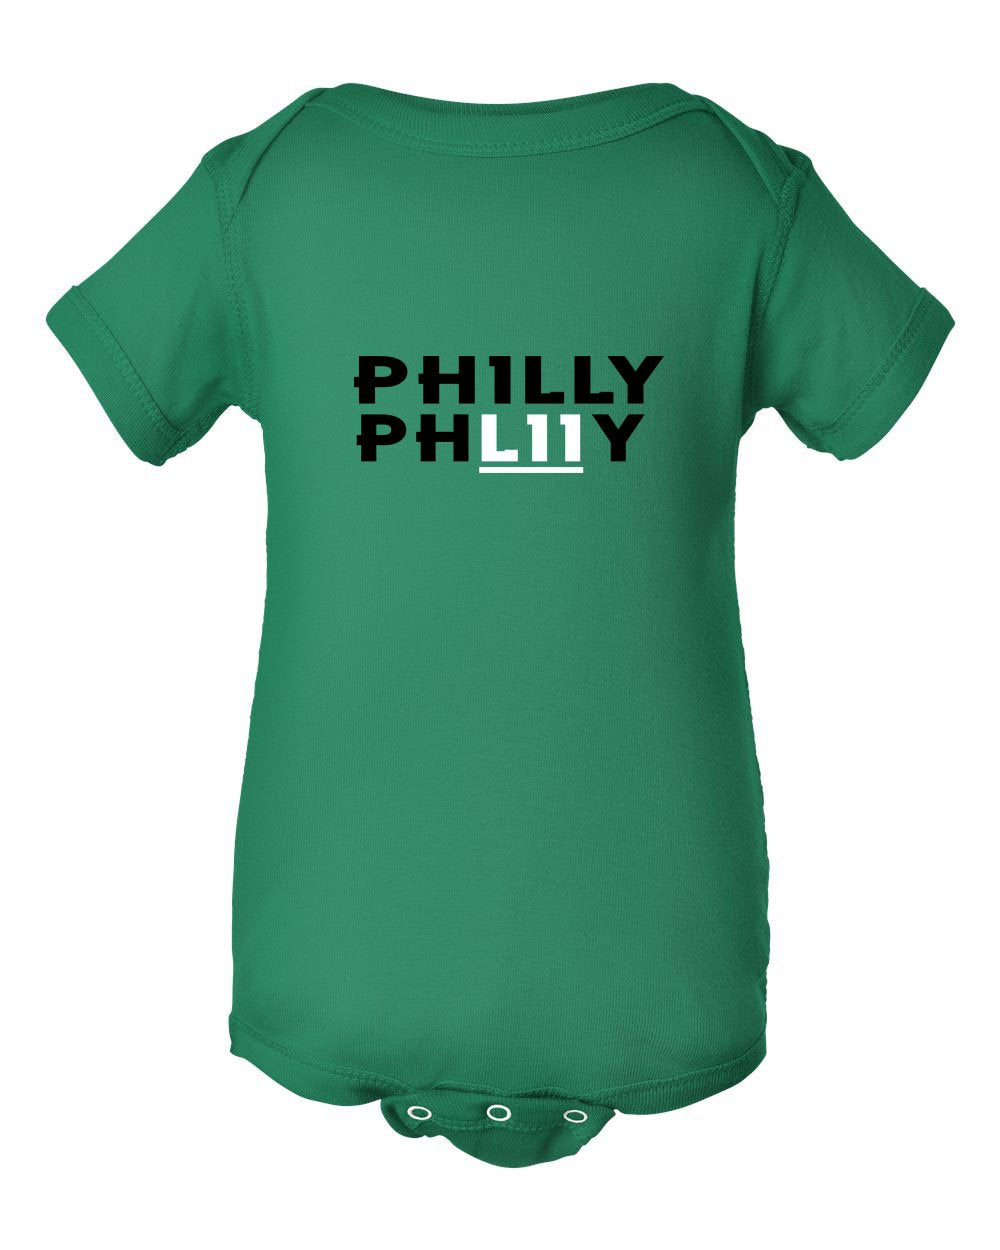 Philly Philly INFANT Onesie